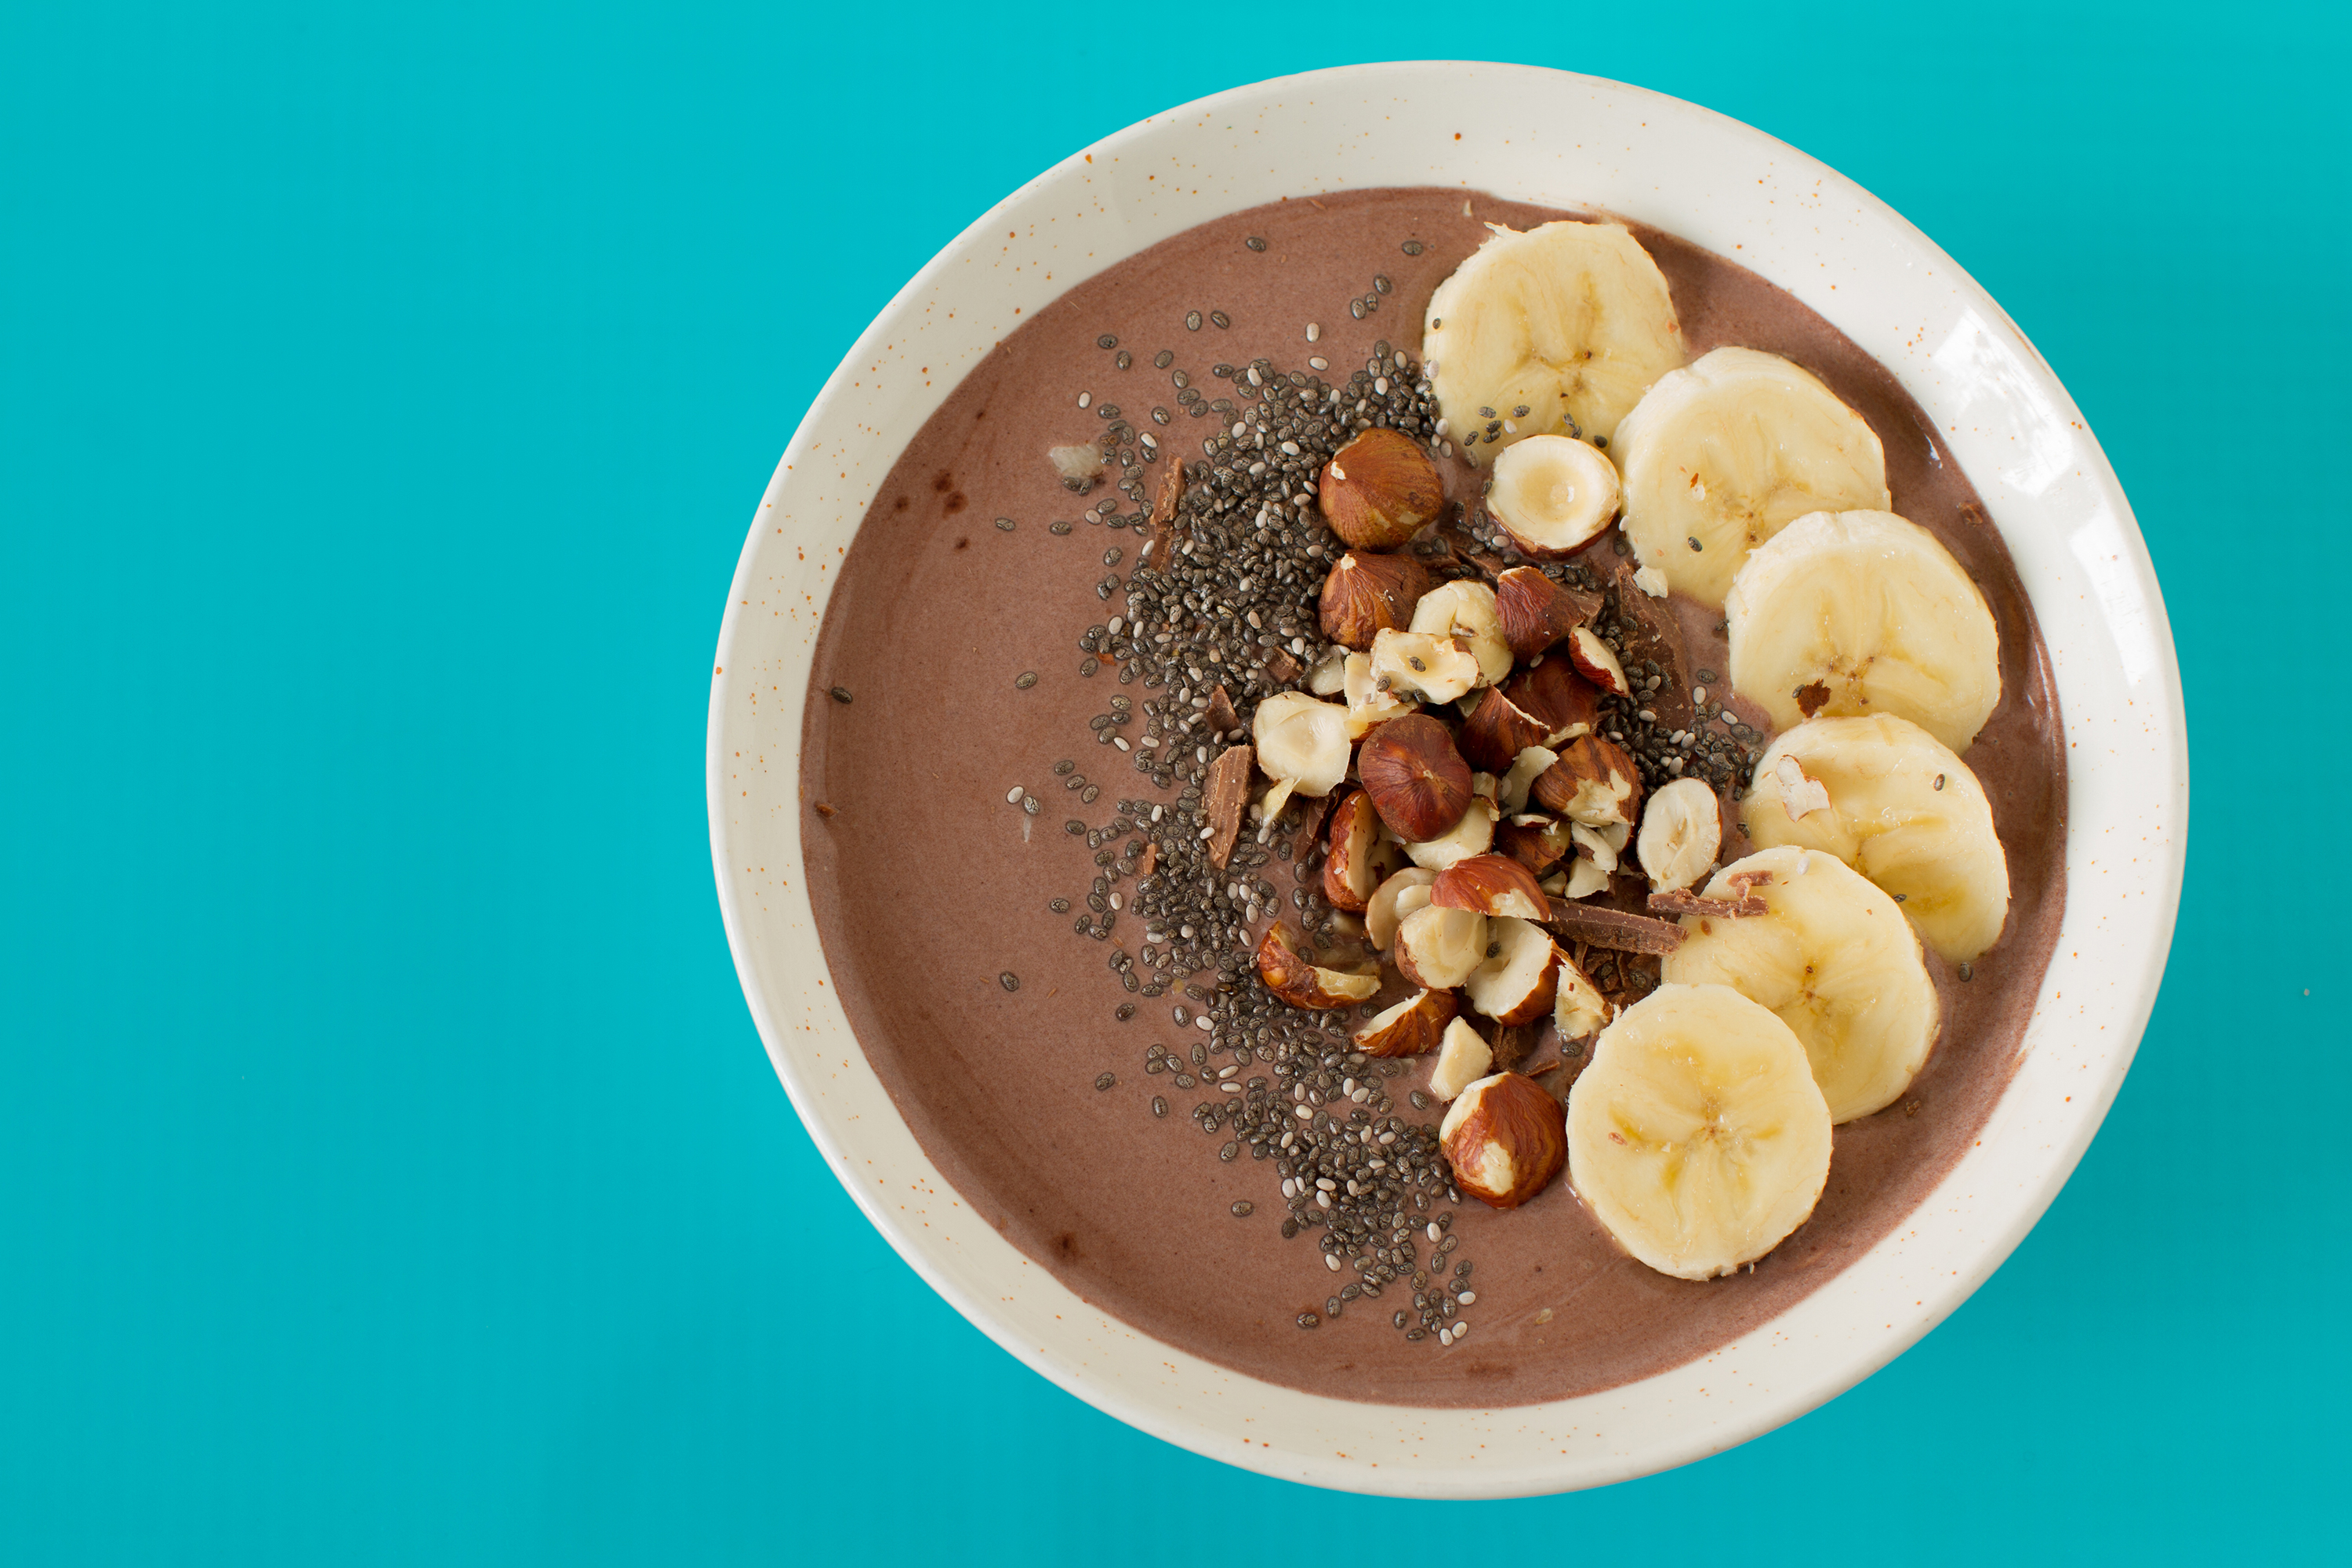 coffee smoothie bowl with banana slices, chia seeds, and chopped hazelnuts